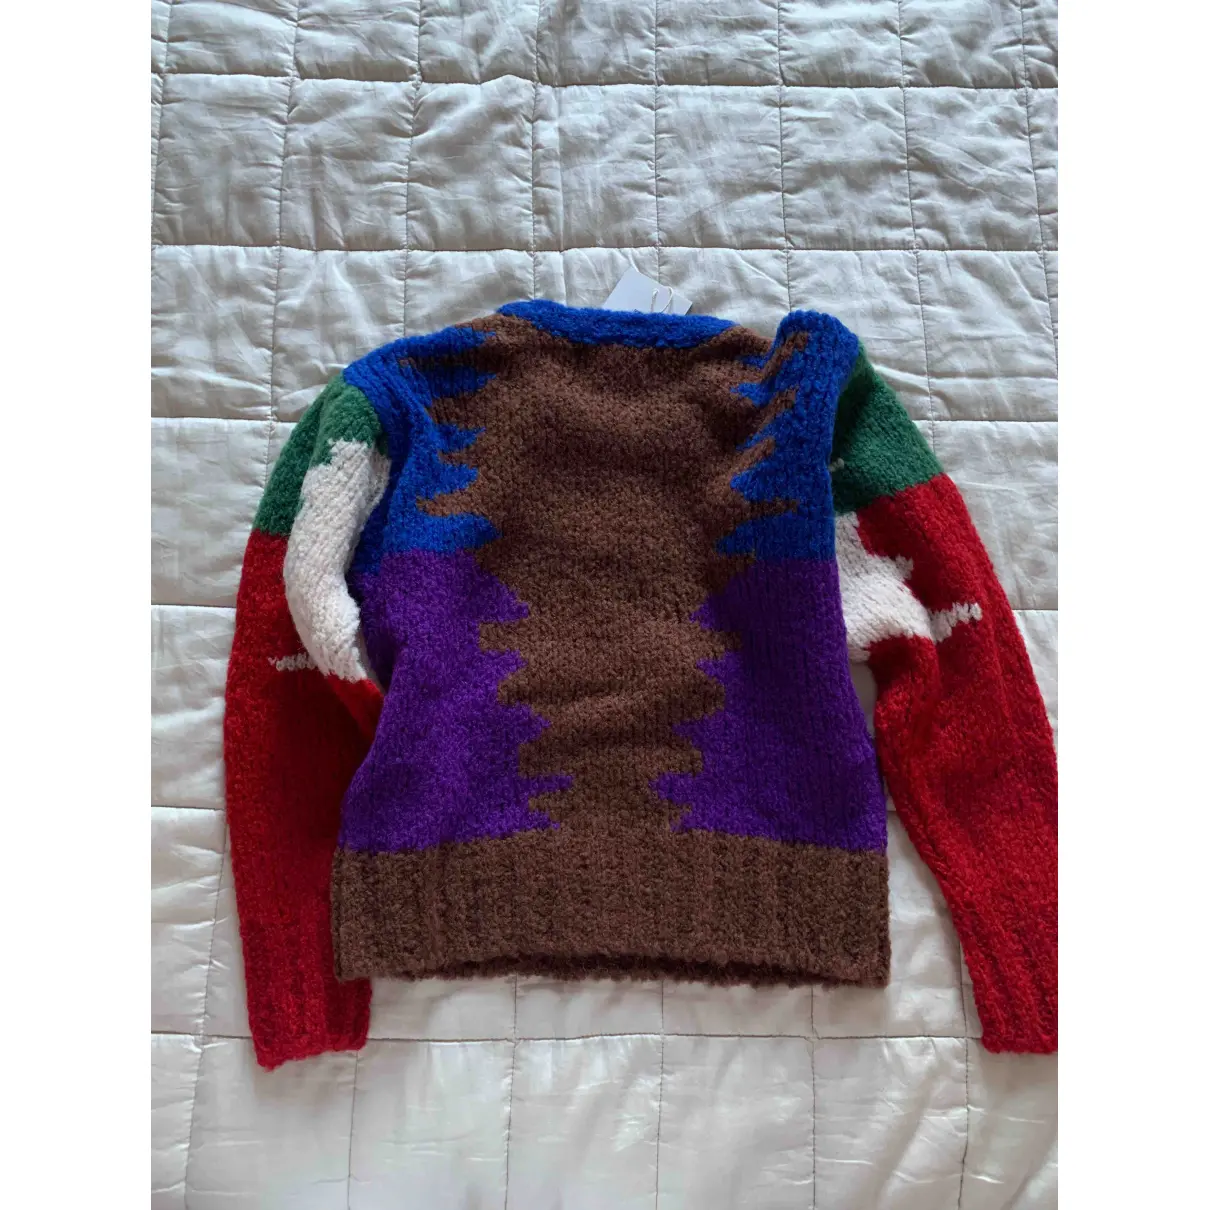 Buy the animals observatory Wool sweater online